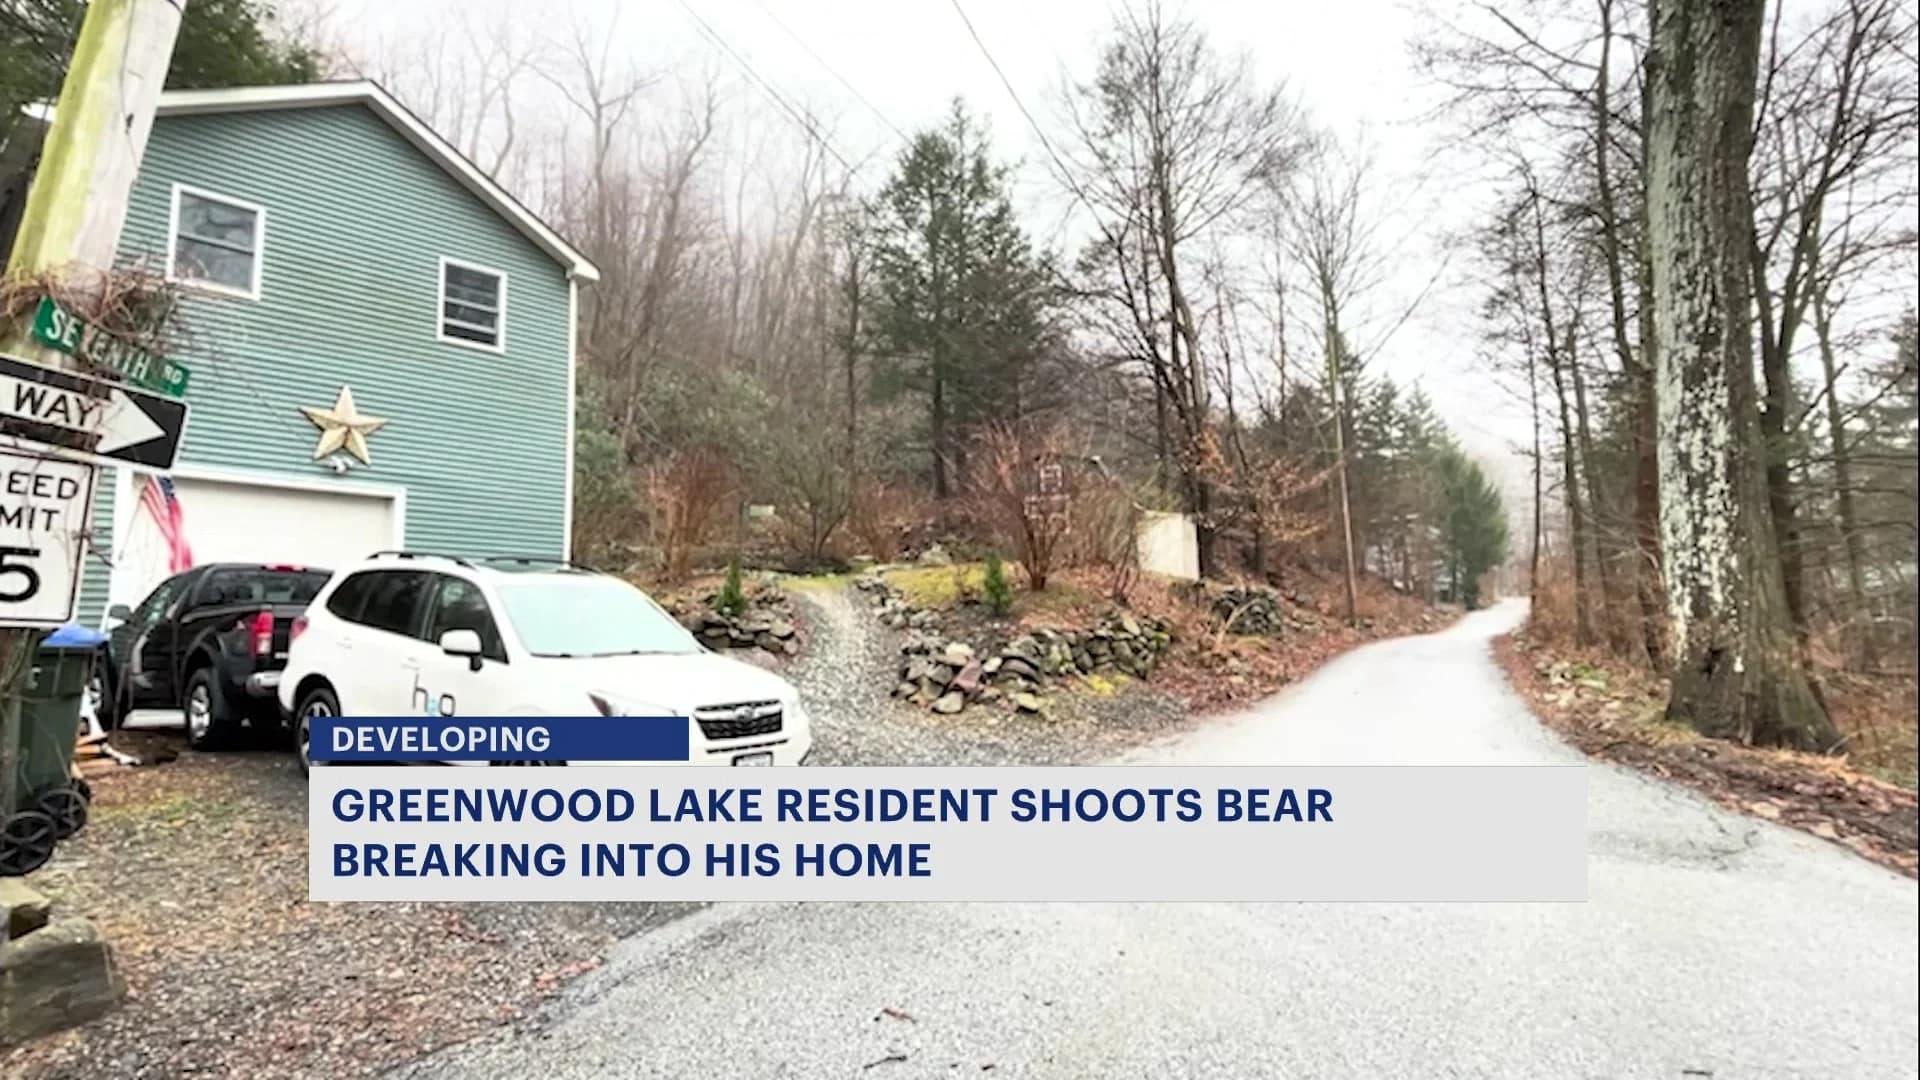 DEC officers search Greenwood Lake for bear that was shot during home break-in